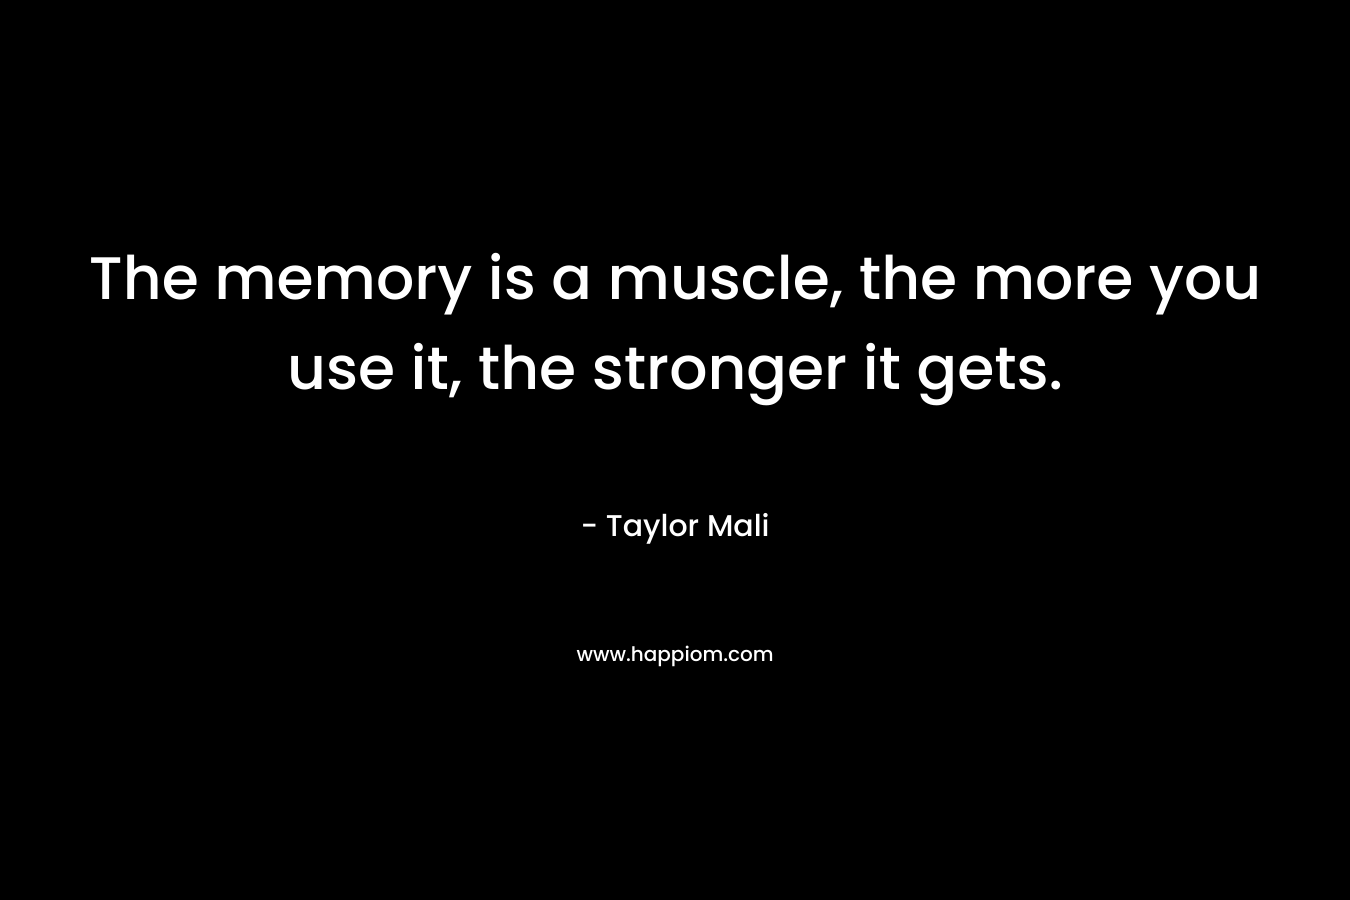 The memory is a muscle, the more you use it, the stronger it gets. – Taylor Mali